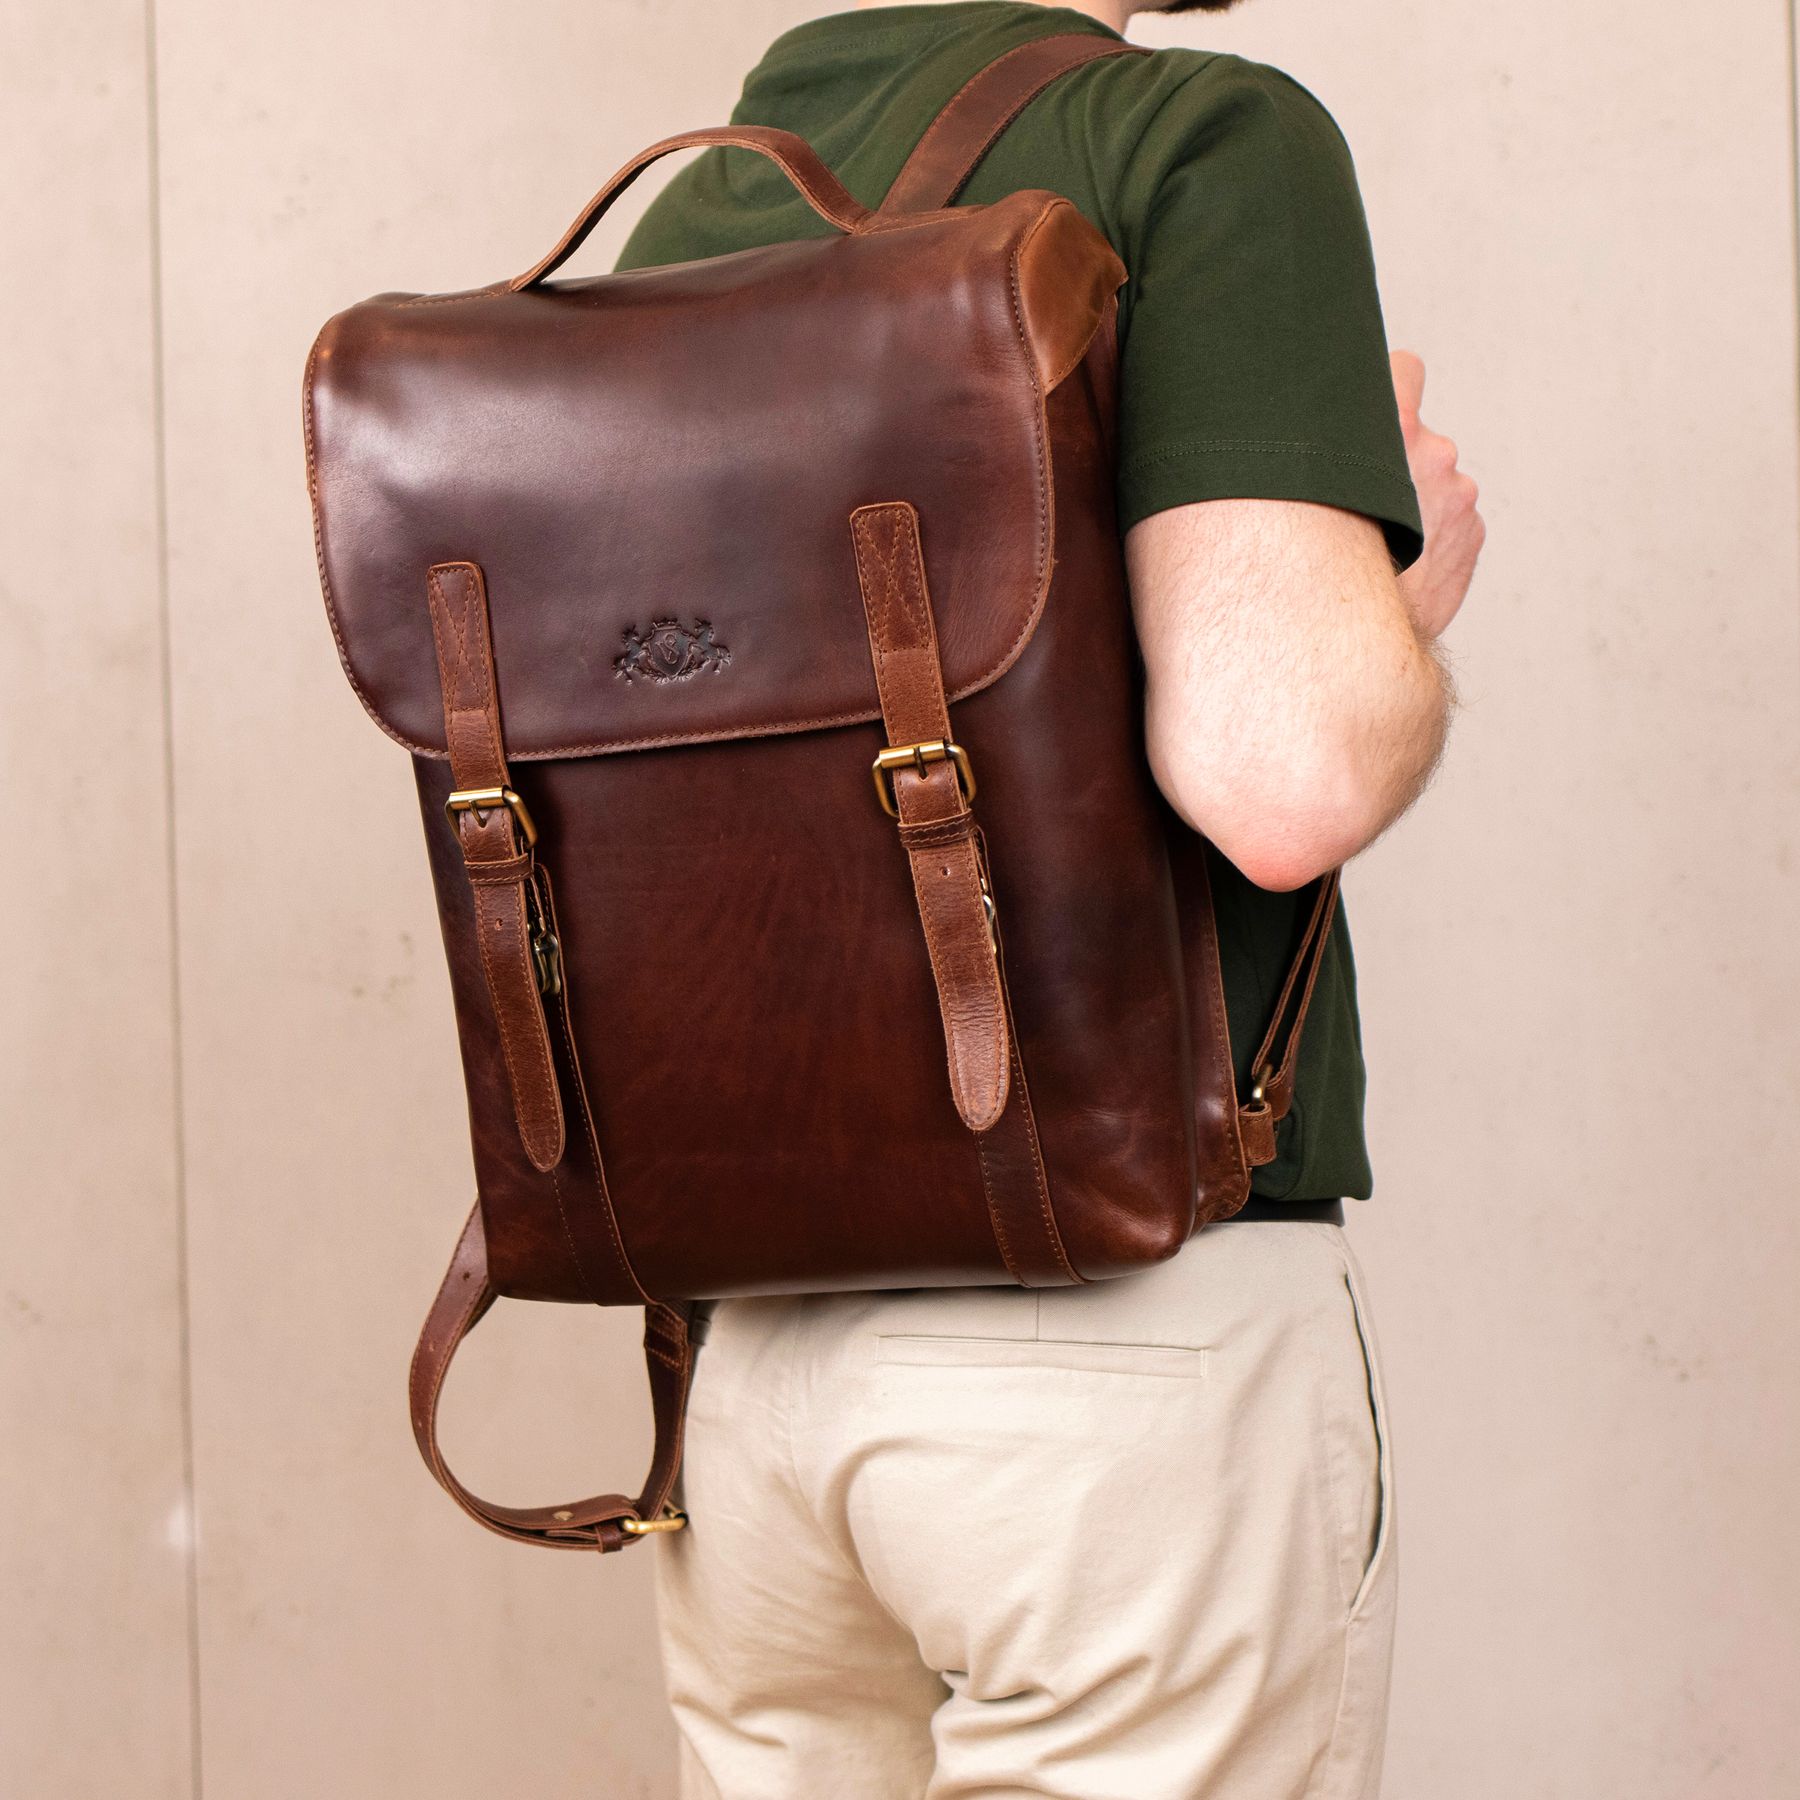 Backpack ETON natural leather brown-cognac